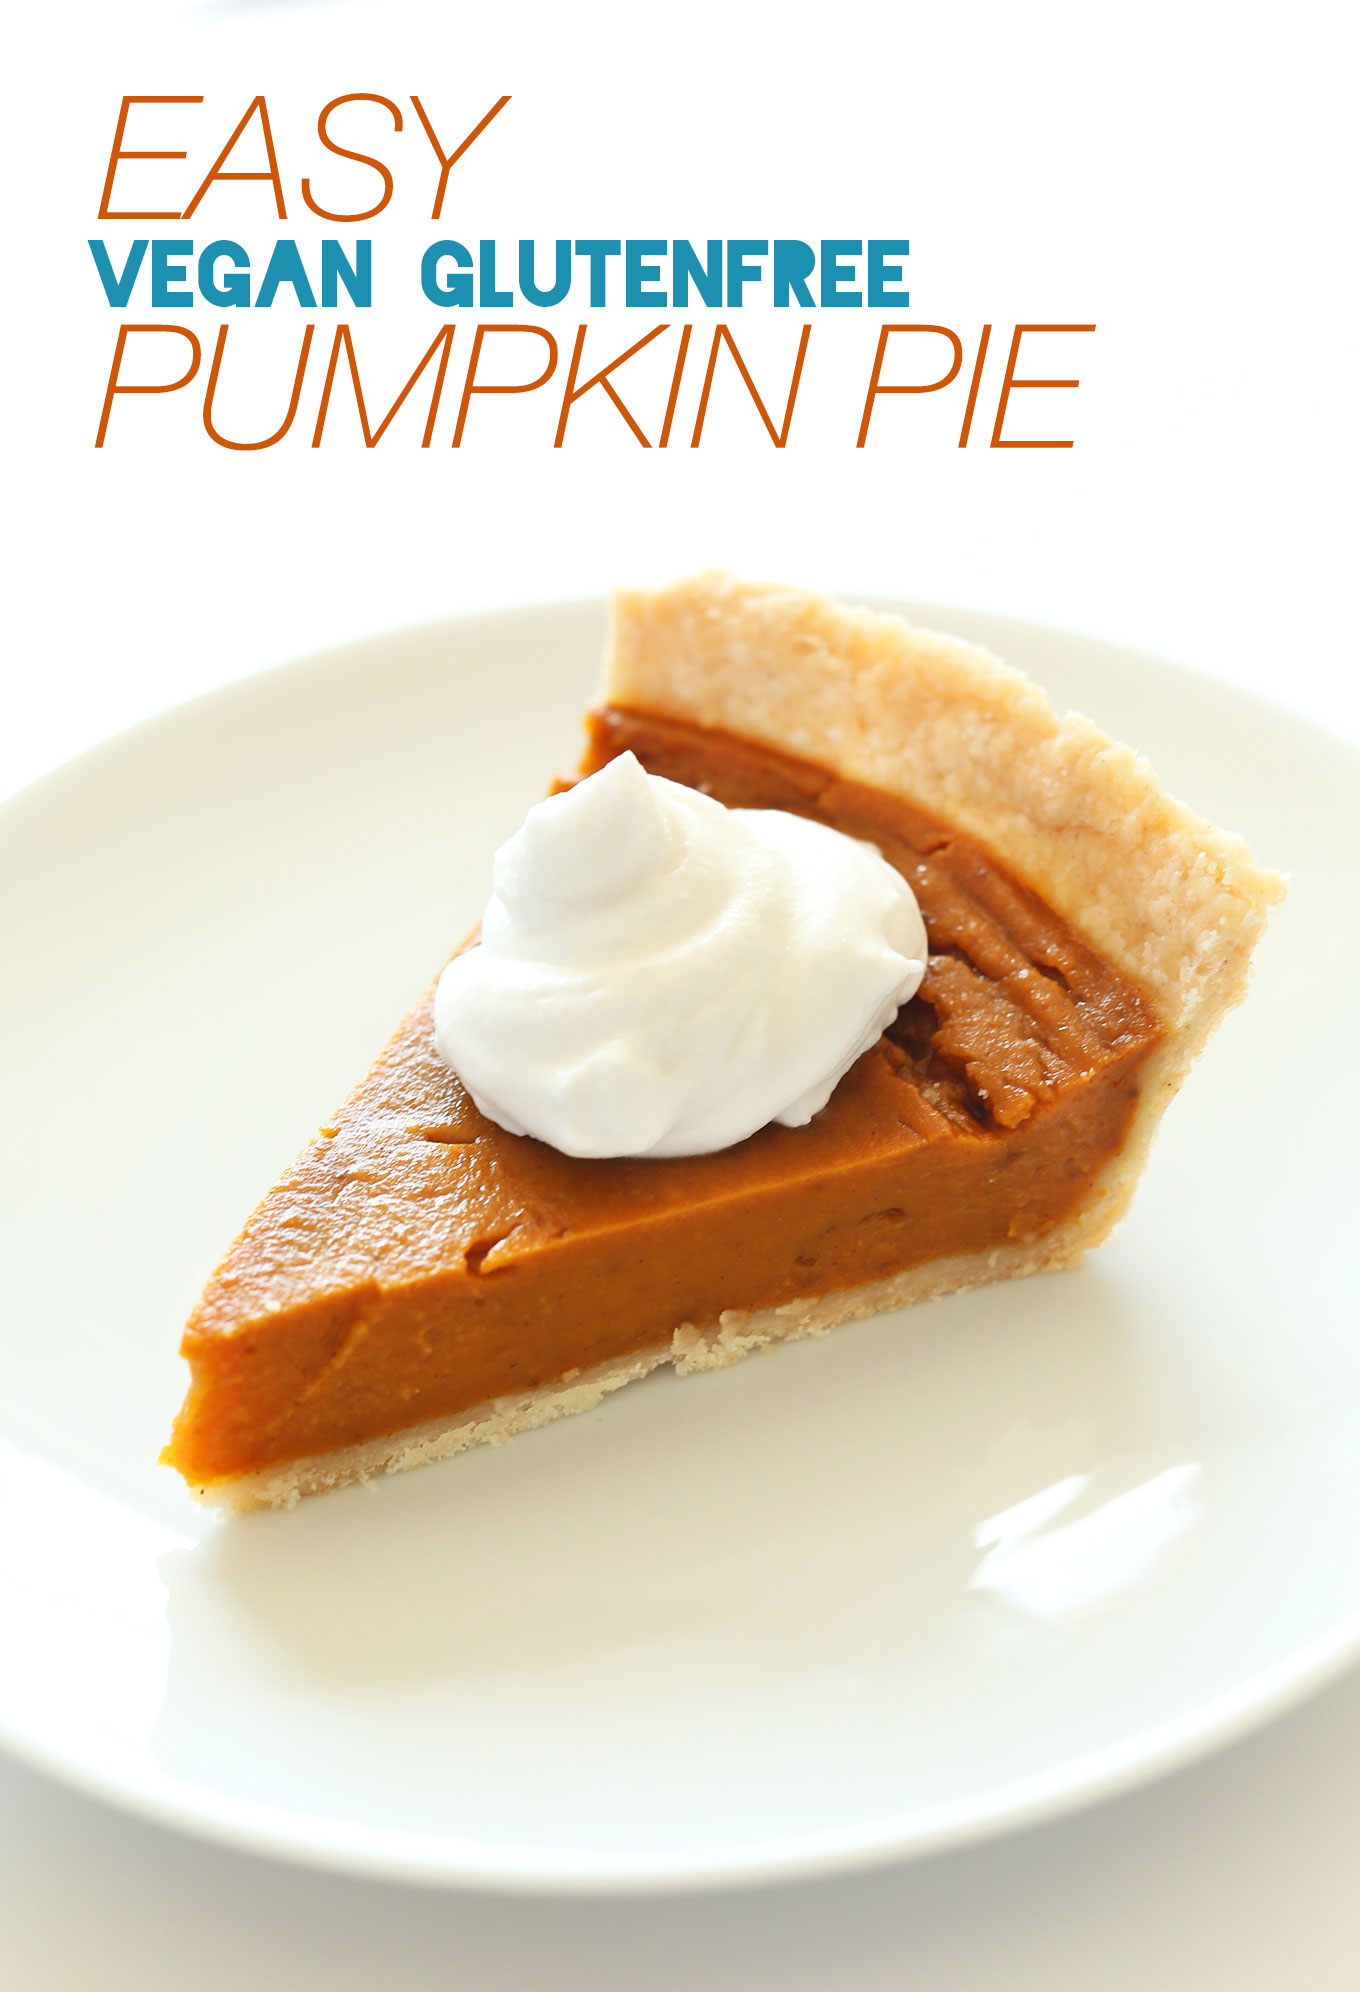 Plate of vegan gluten-free pumpkin pie with a dollop of coconut whipped cream